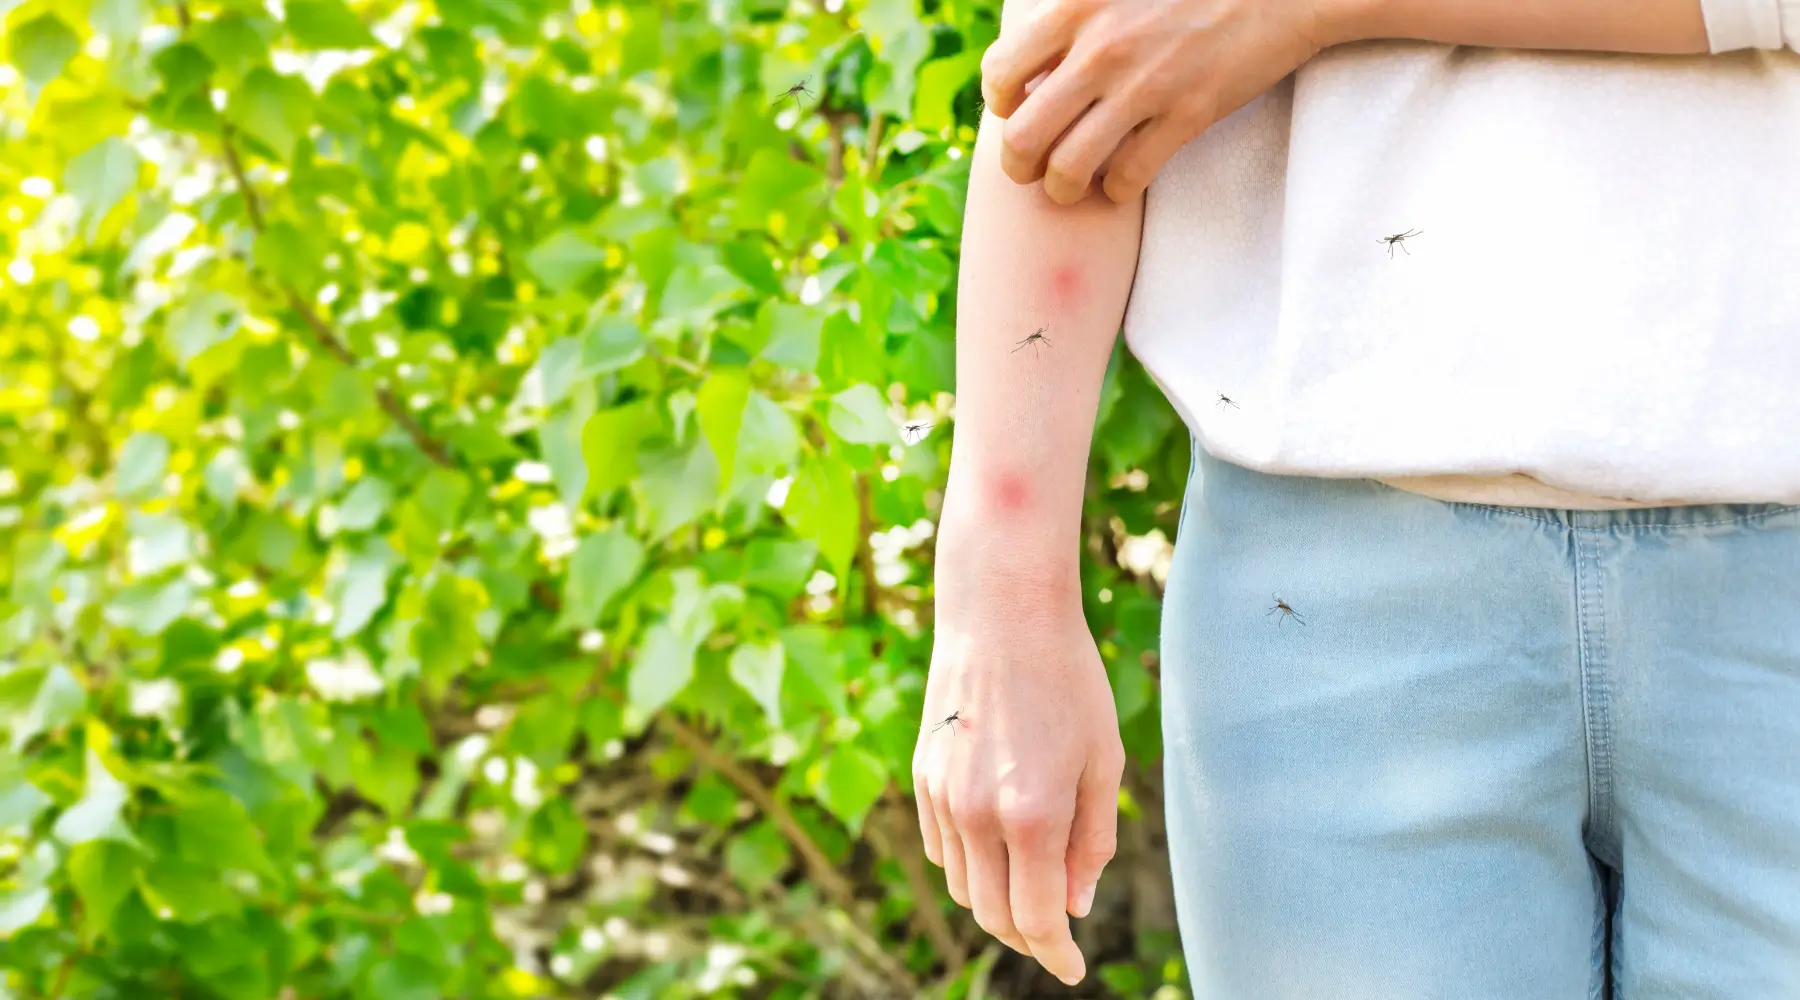 How Long Do Mosquito Bites Last? by Petri Pest Control in South Florida